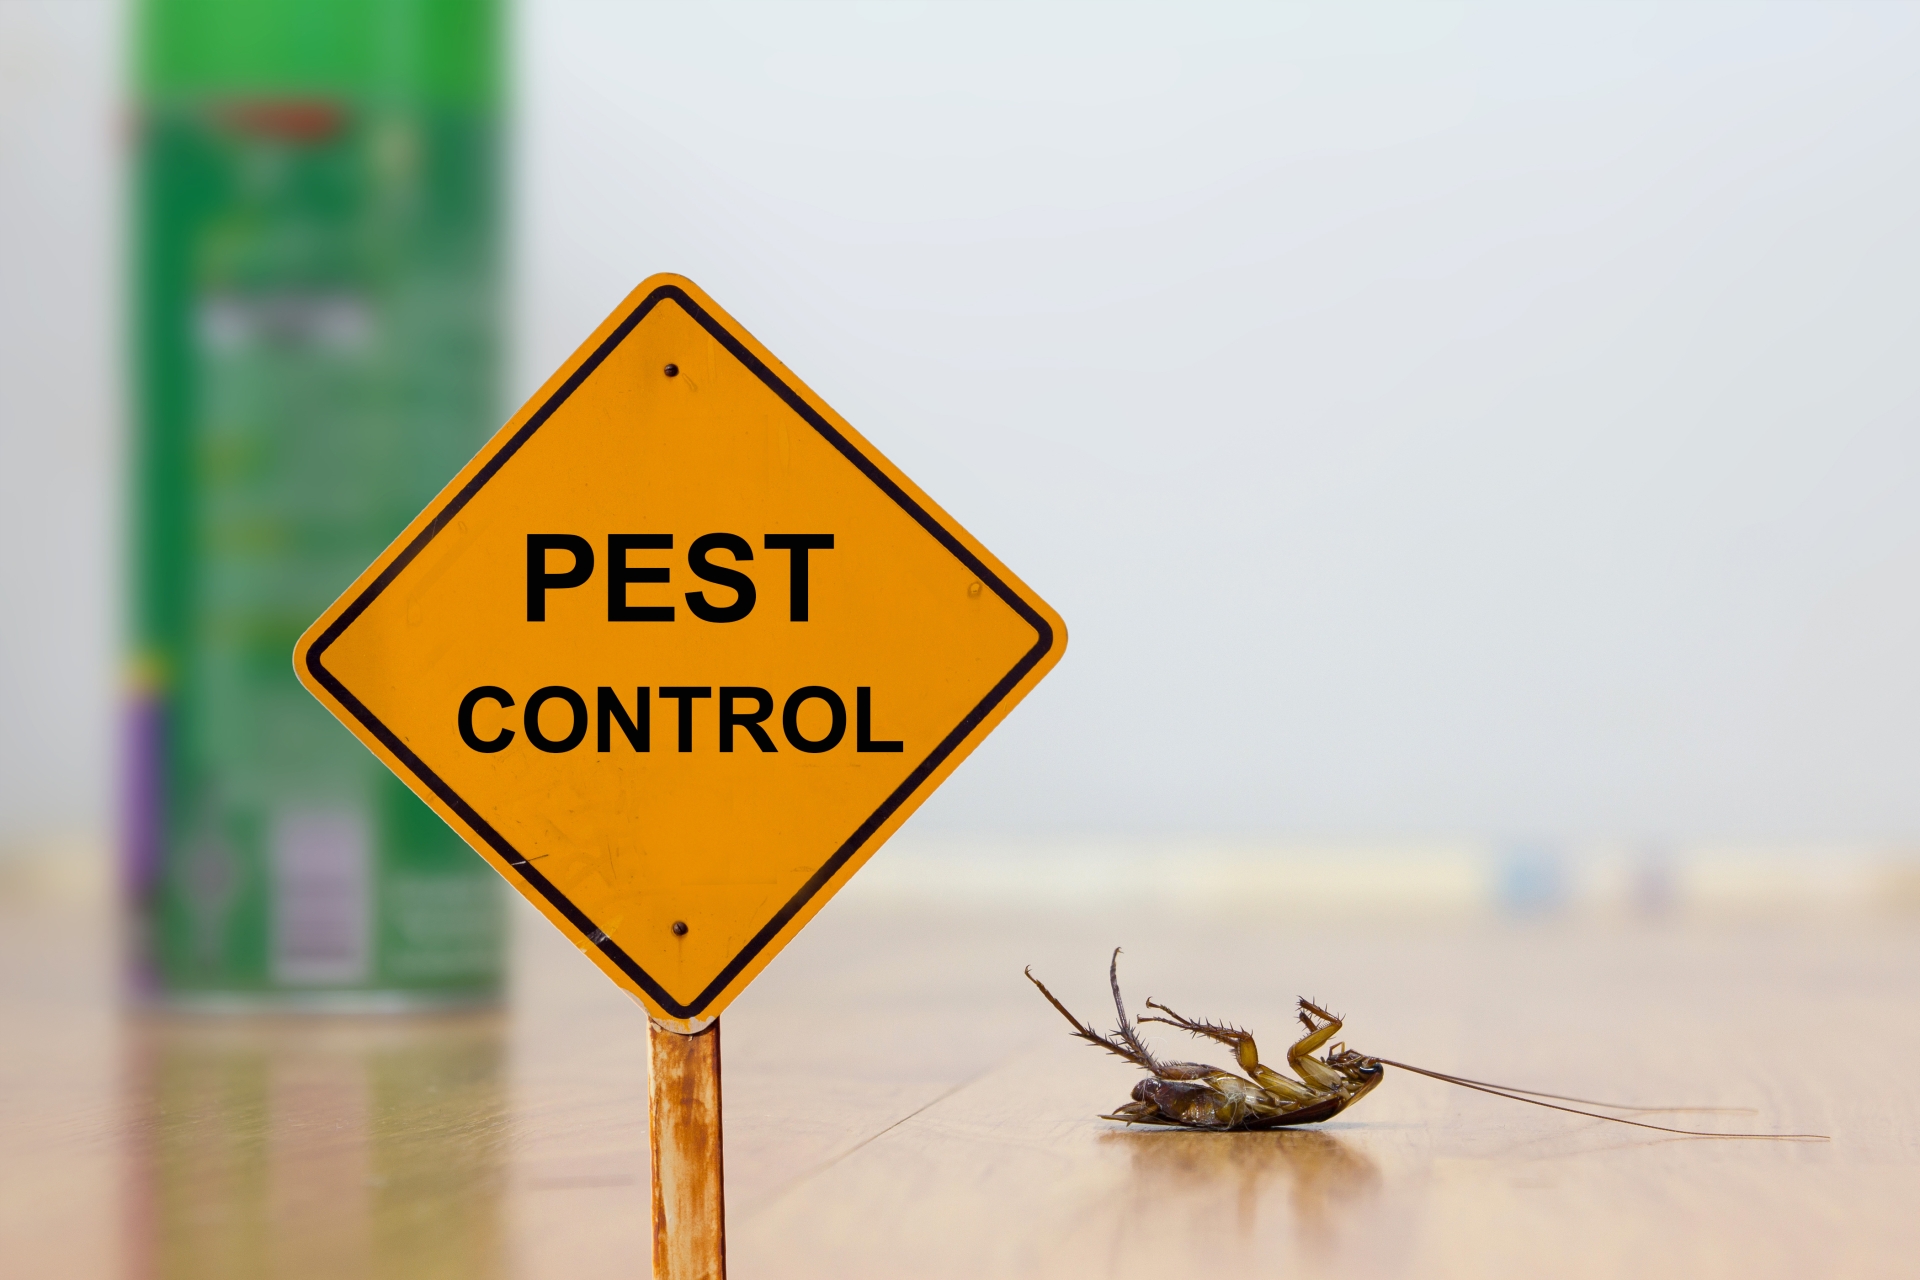 24 Hour Pest Control, Pest Control in Leatherhead, Oxshott, Fetcham, KT22. Call Now 020 8166 9746